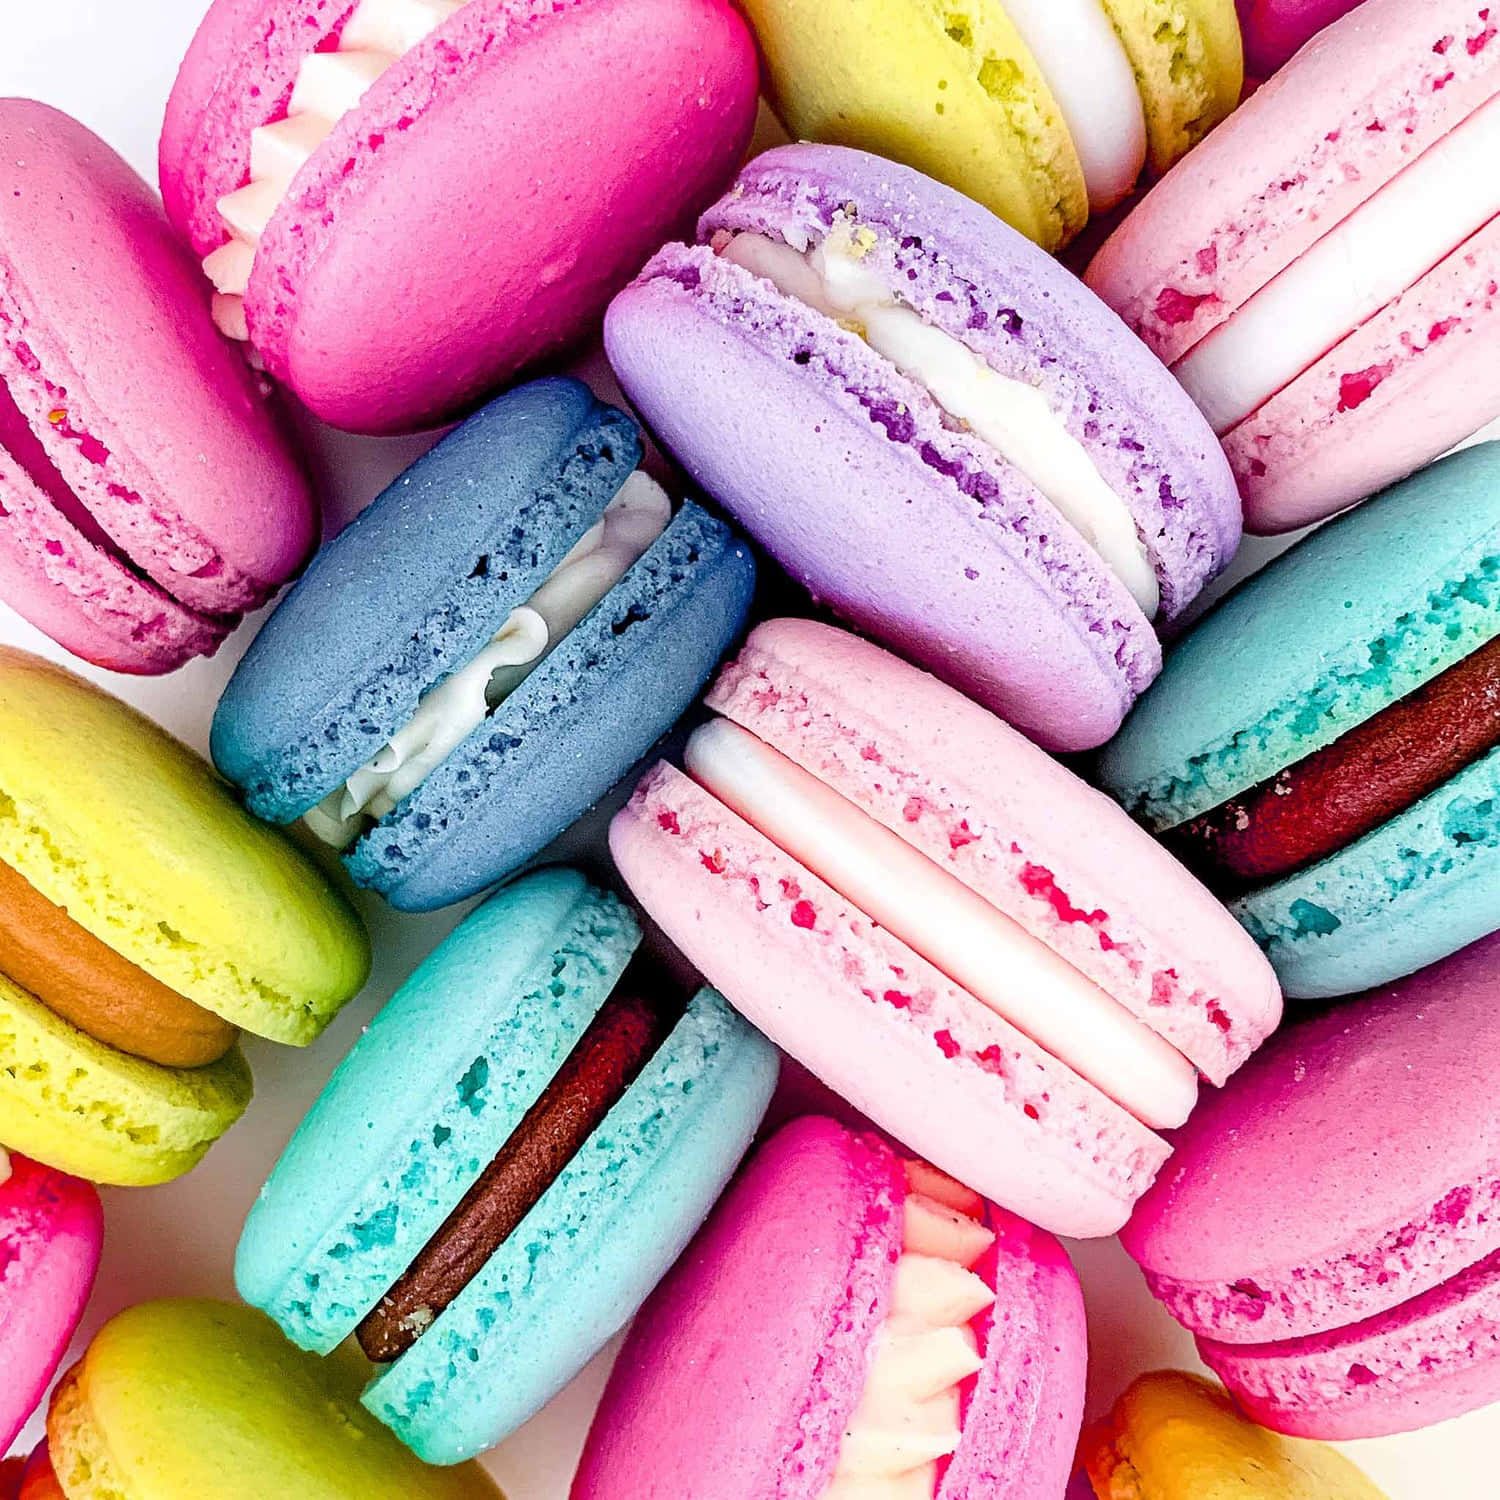 Colorful macarons on a white background - Macarons